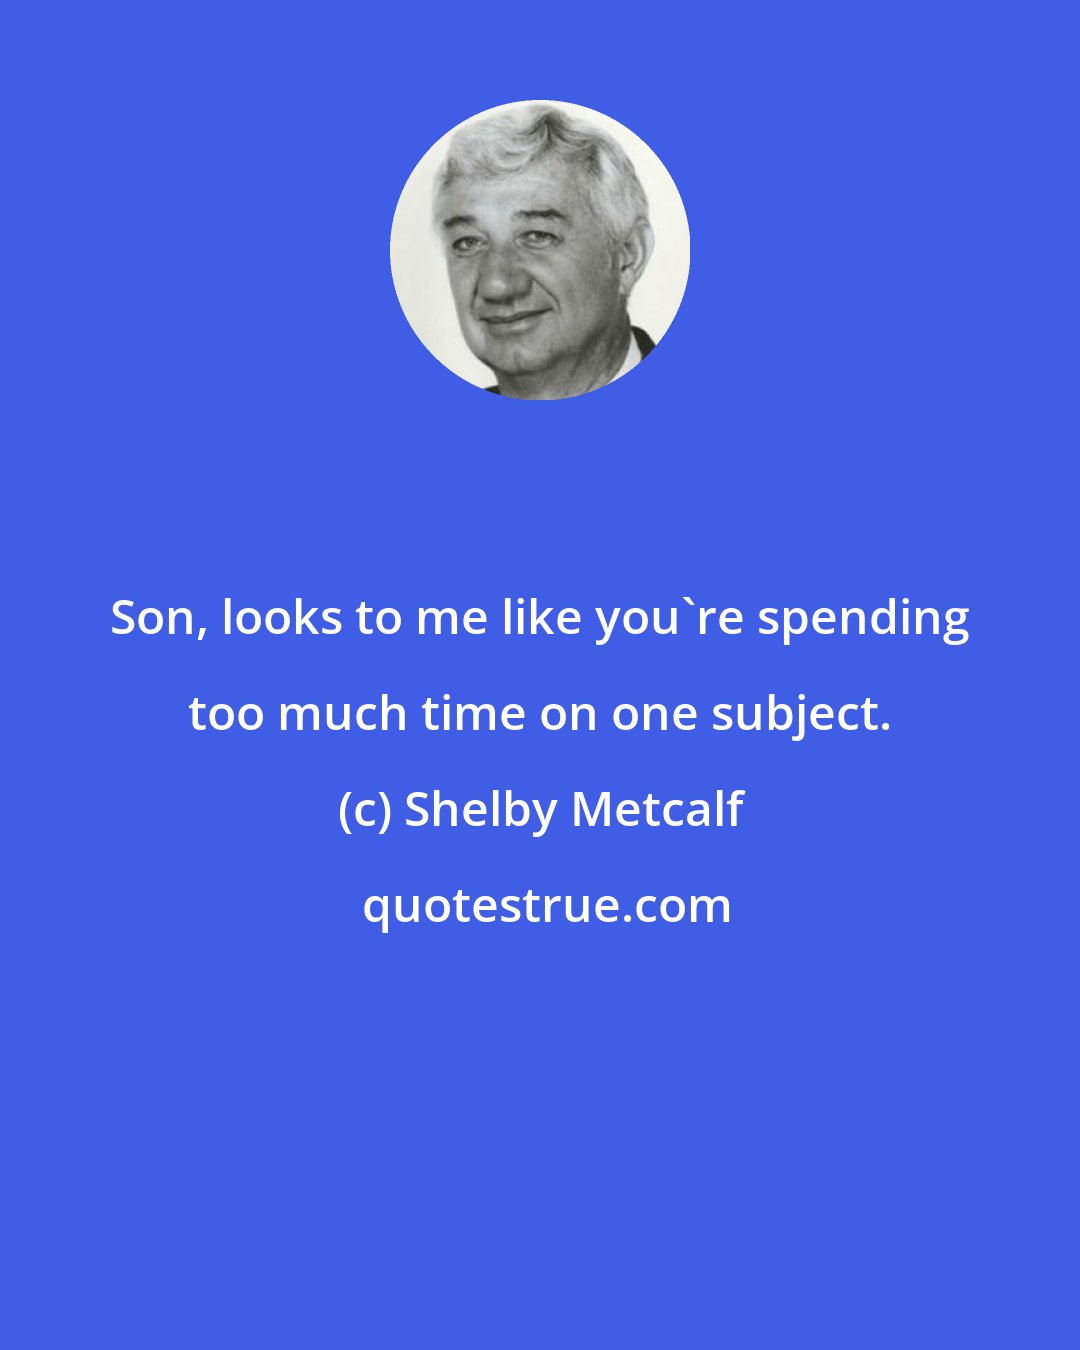 Shelby Metcalf: Son, looks to me like you're spending too much time on one subject.